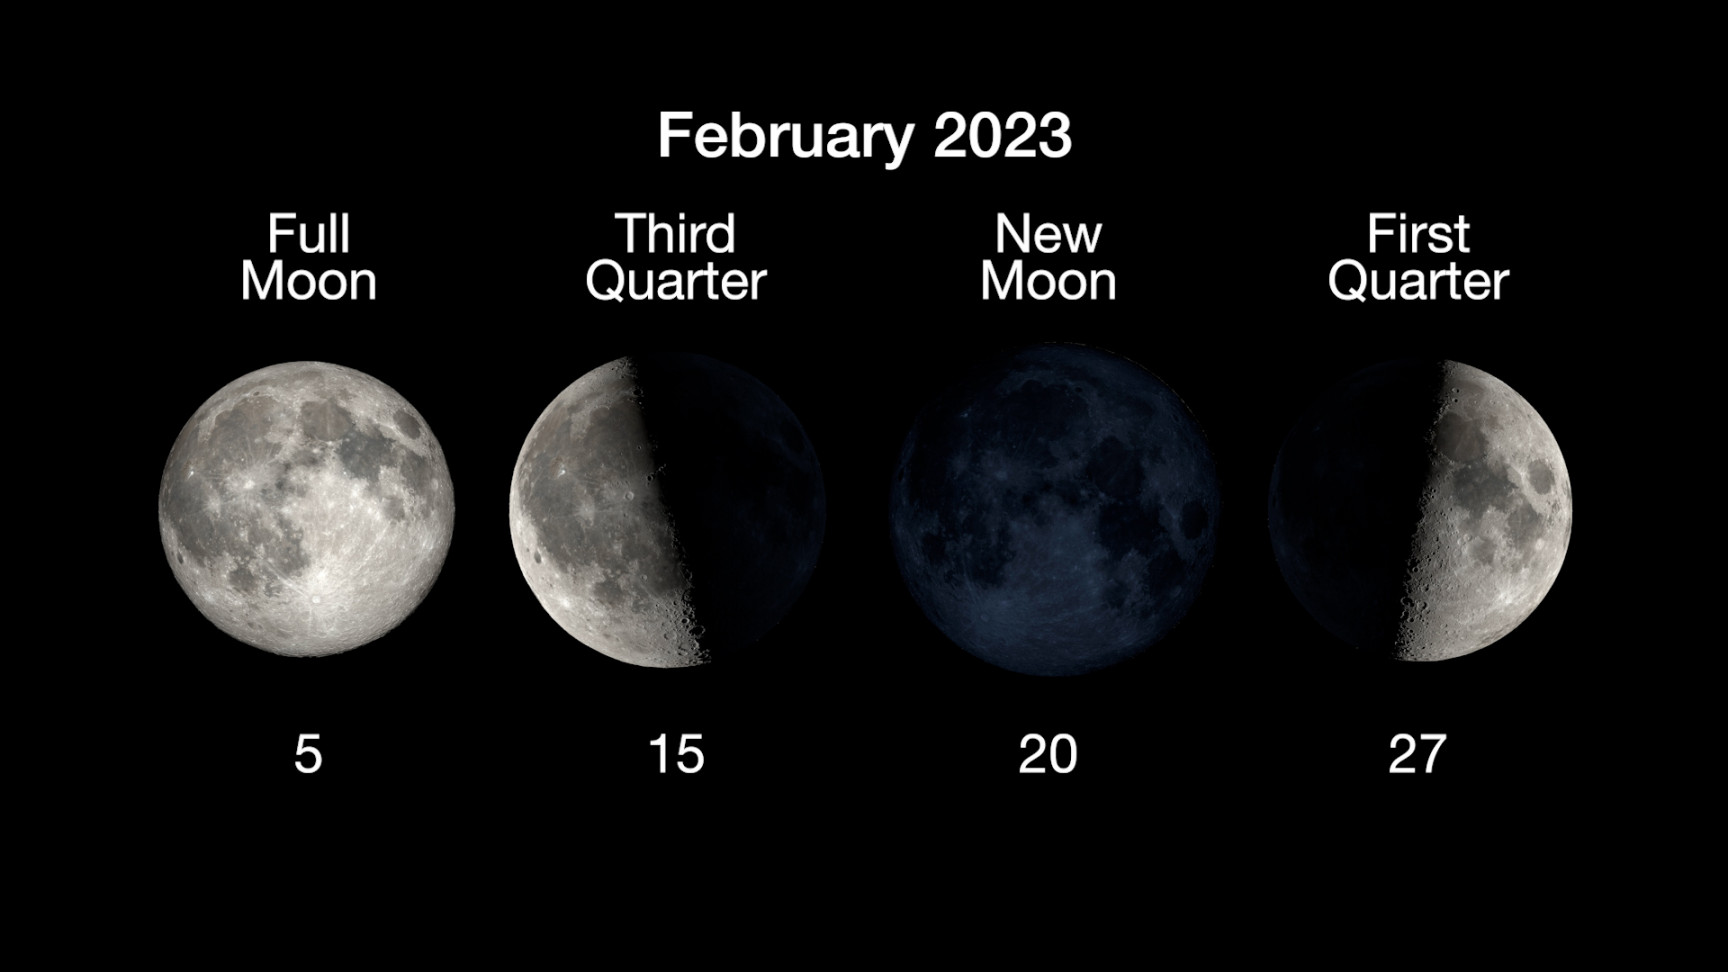 February : The Next Full Moon is the Snow, Storm, or Hunger